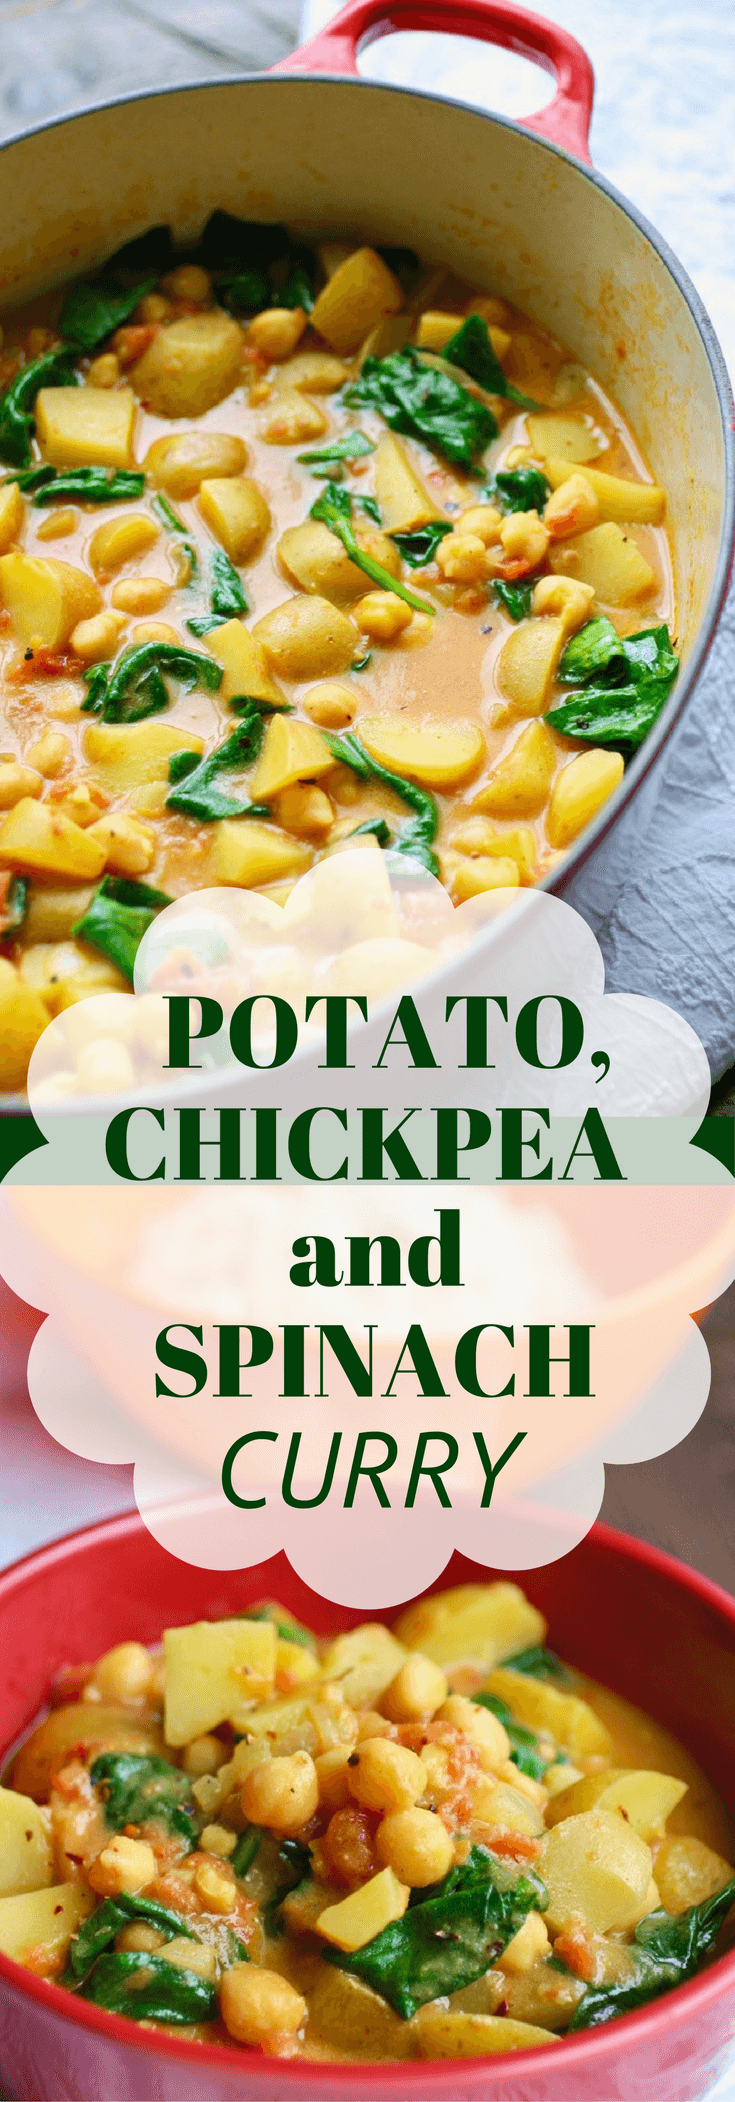 Potato, Chickpea, and Spinach Curry is a delight! It's filling and big on flavor!